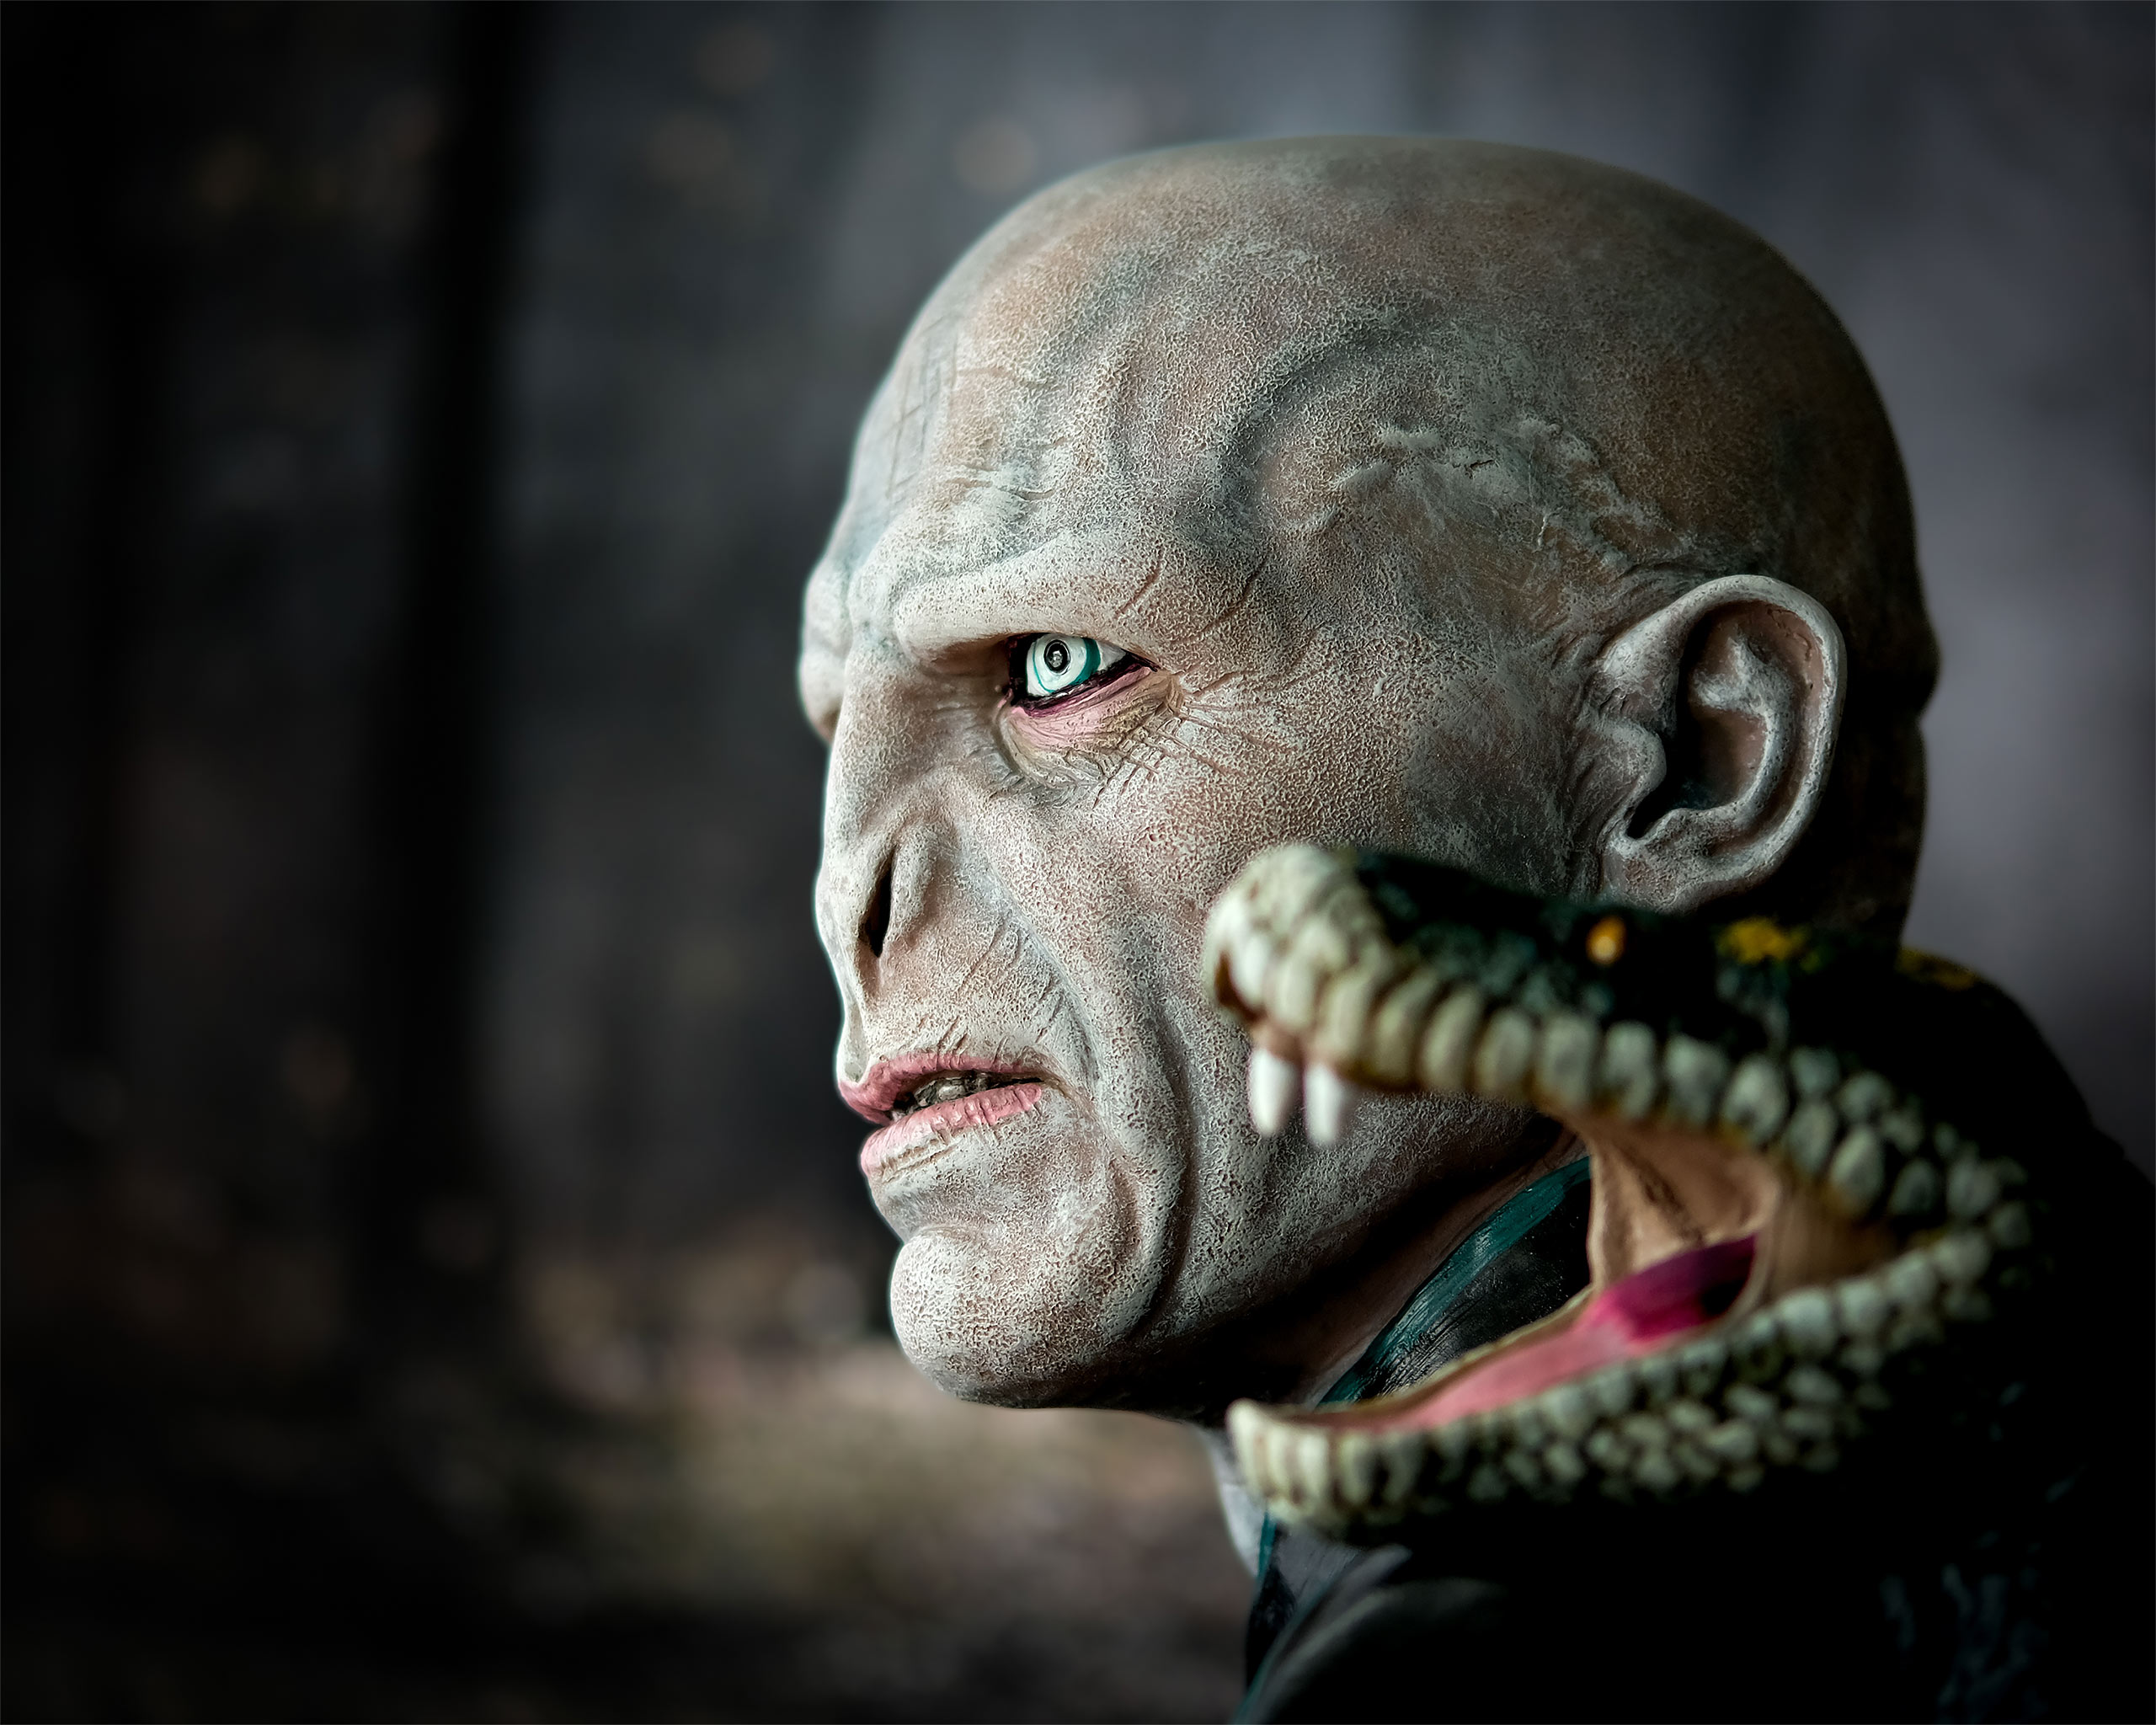 Lord Voldemort with Nagini Bust - Harry Potter